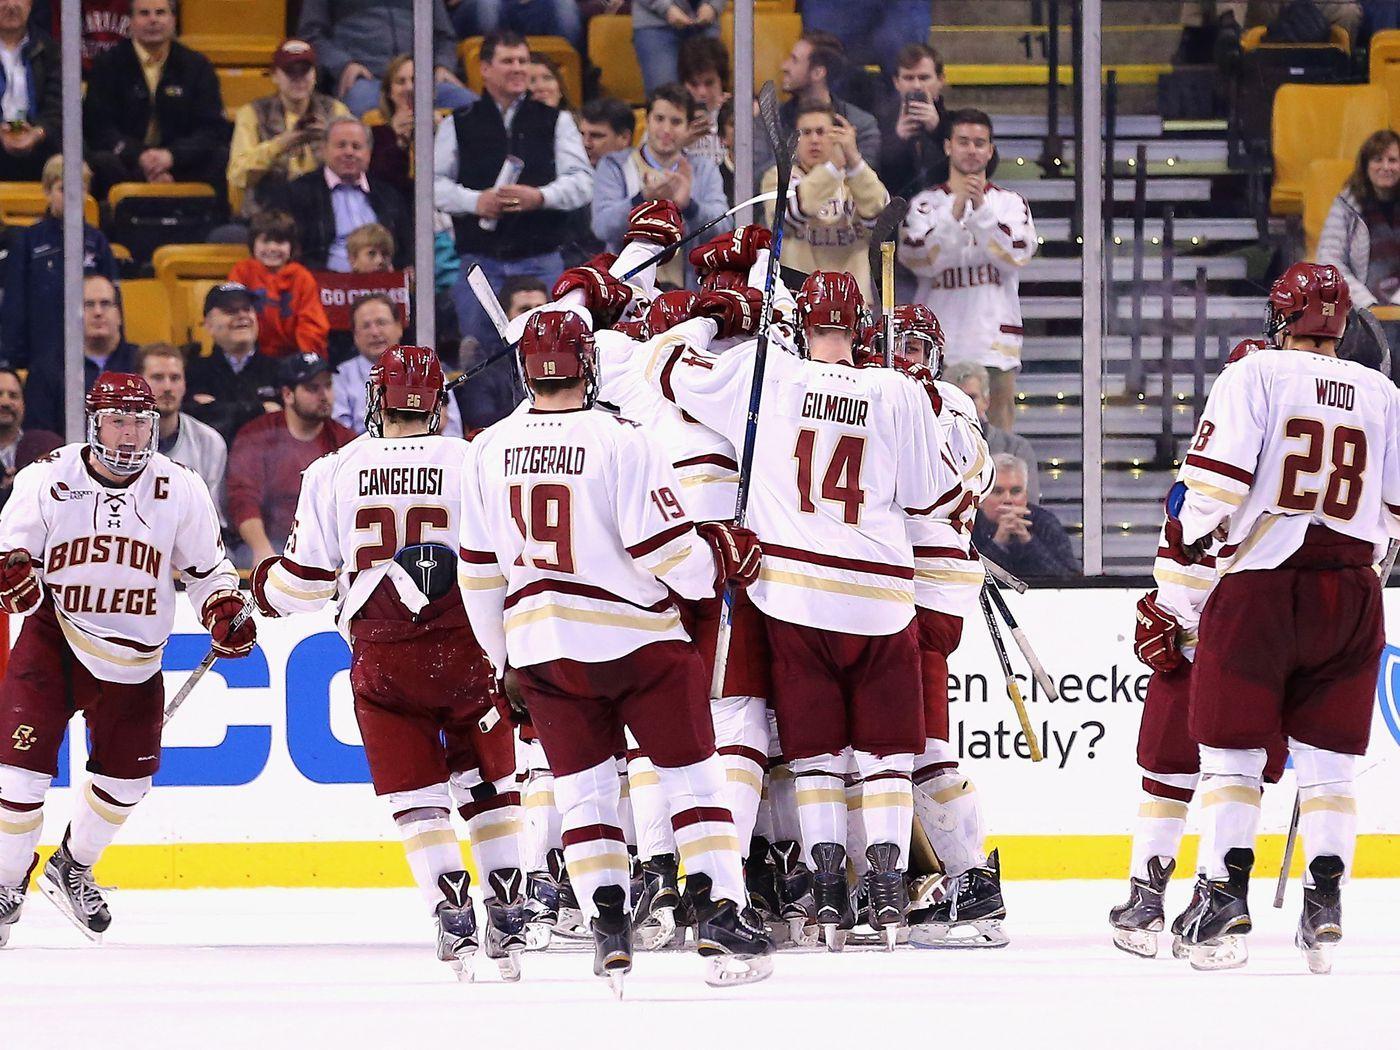 2016 17 Boston College Hockey Schedule Coming In To Focus